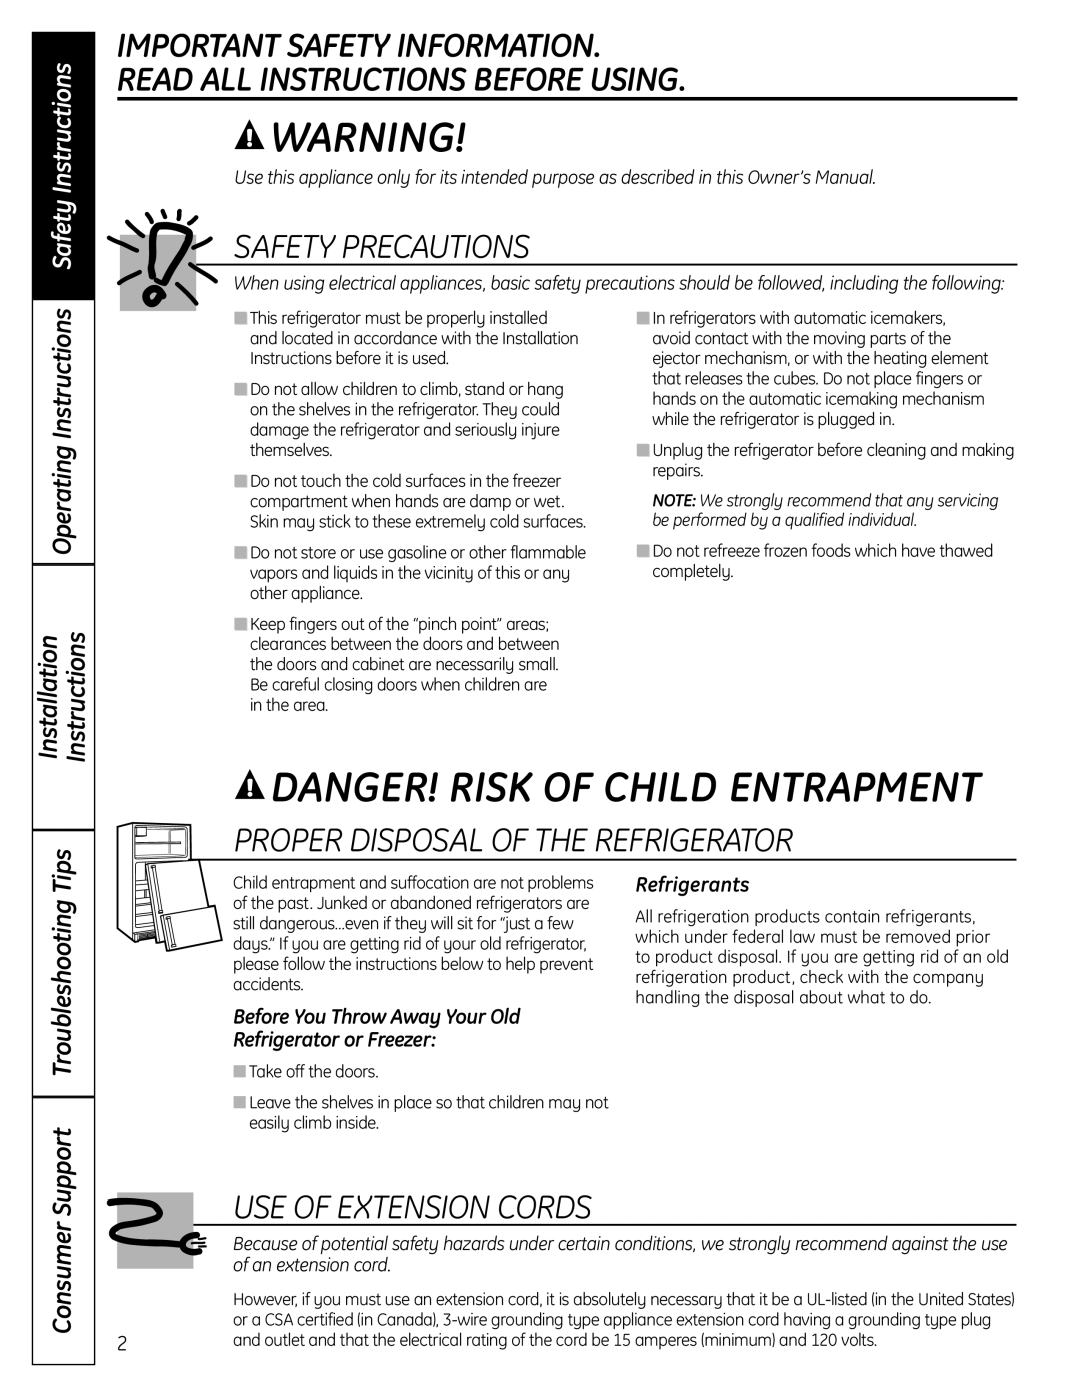 GE PFSS6SMXSS Danger! Risk Of Child Entrapment, Important Safety Information Read All Instructions Before Using 